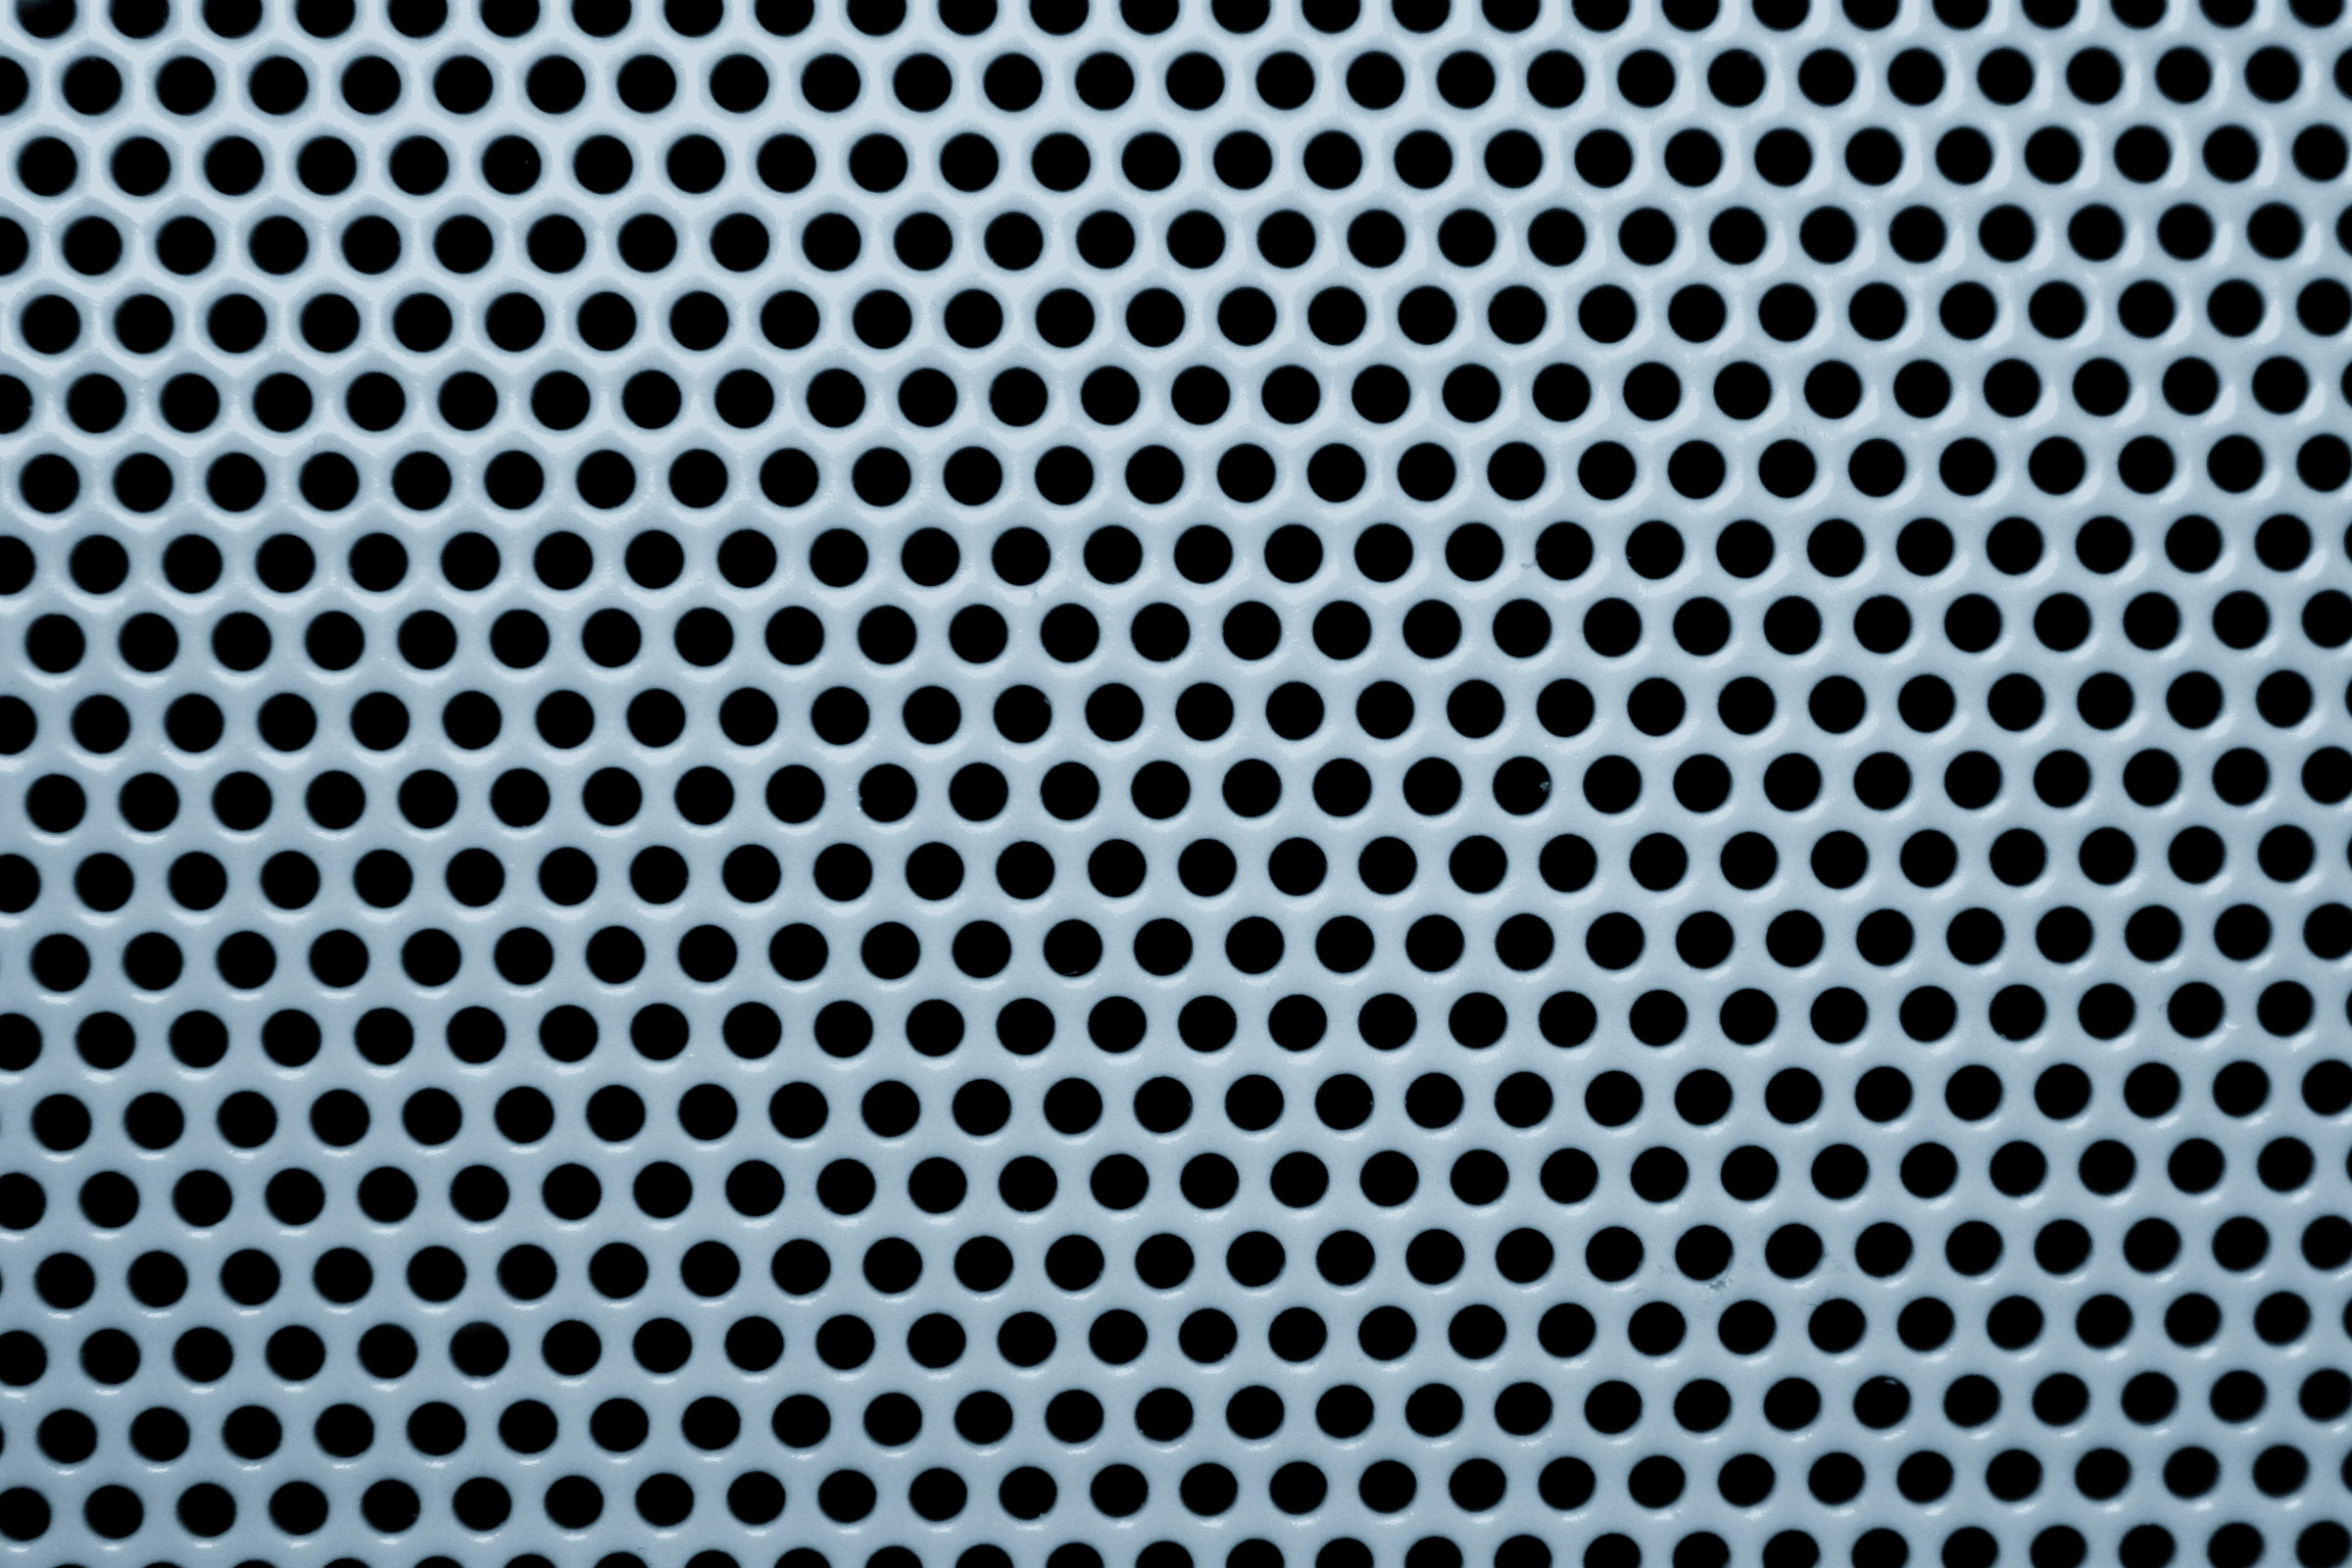 Blue Gray Metal Mesh with Round Holes Texture Picture | Free ...